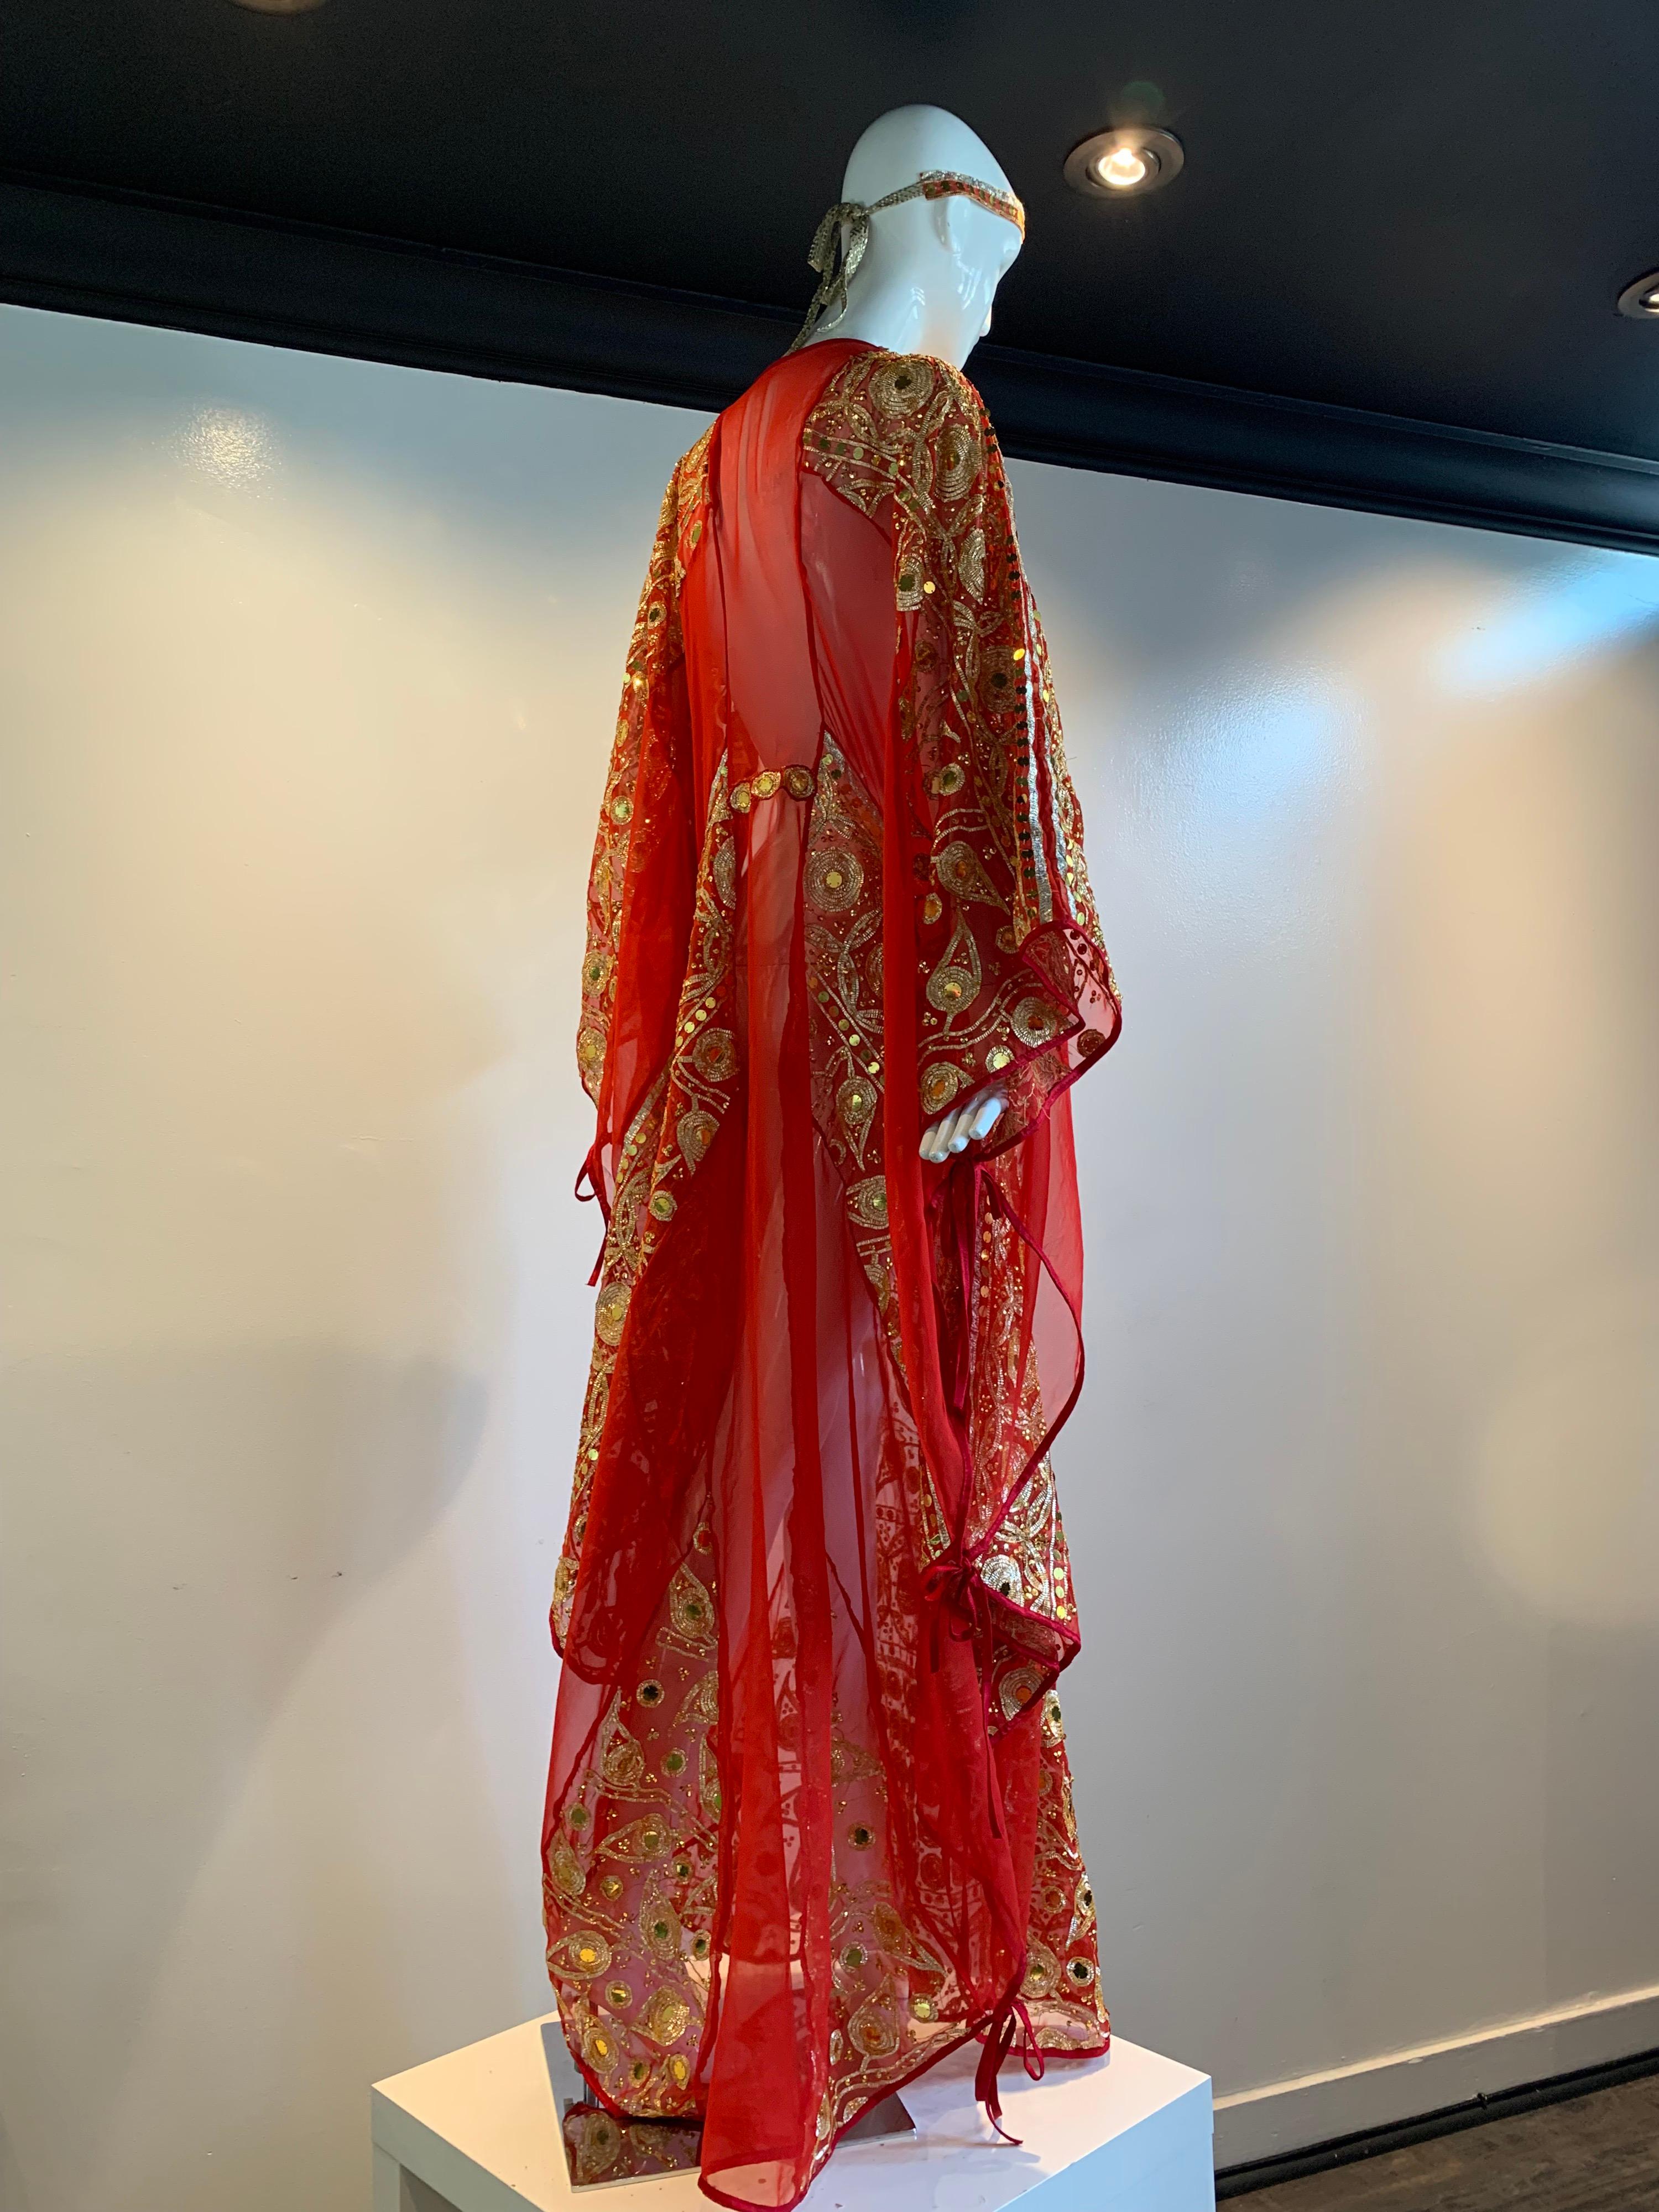 Torso Creations Red Silk Chiffon Caftan Heavily Embroidered W/ Gold & Sequins For Sale 9